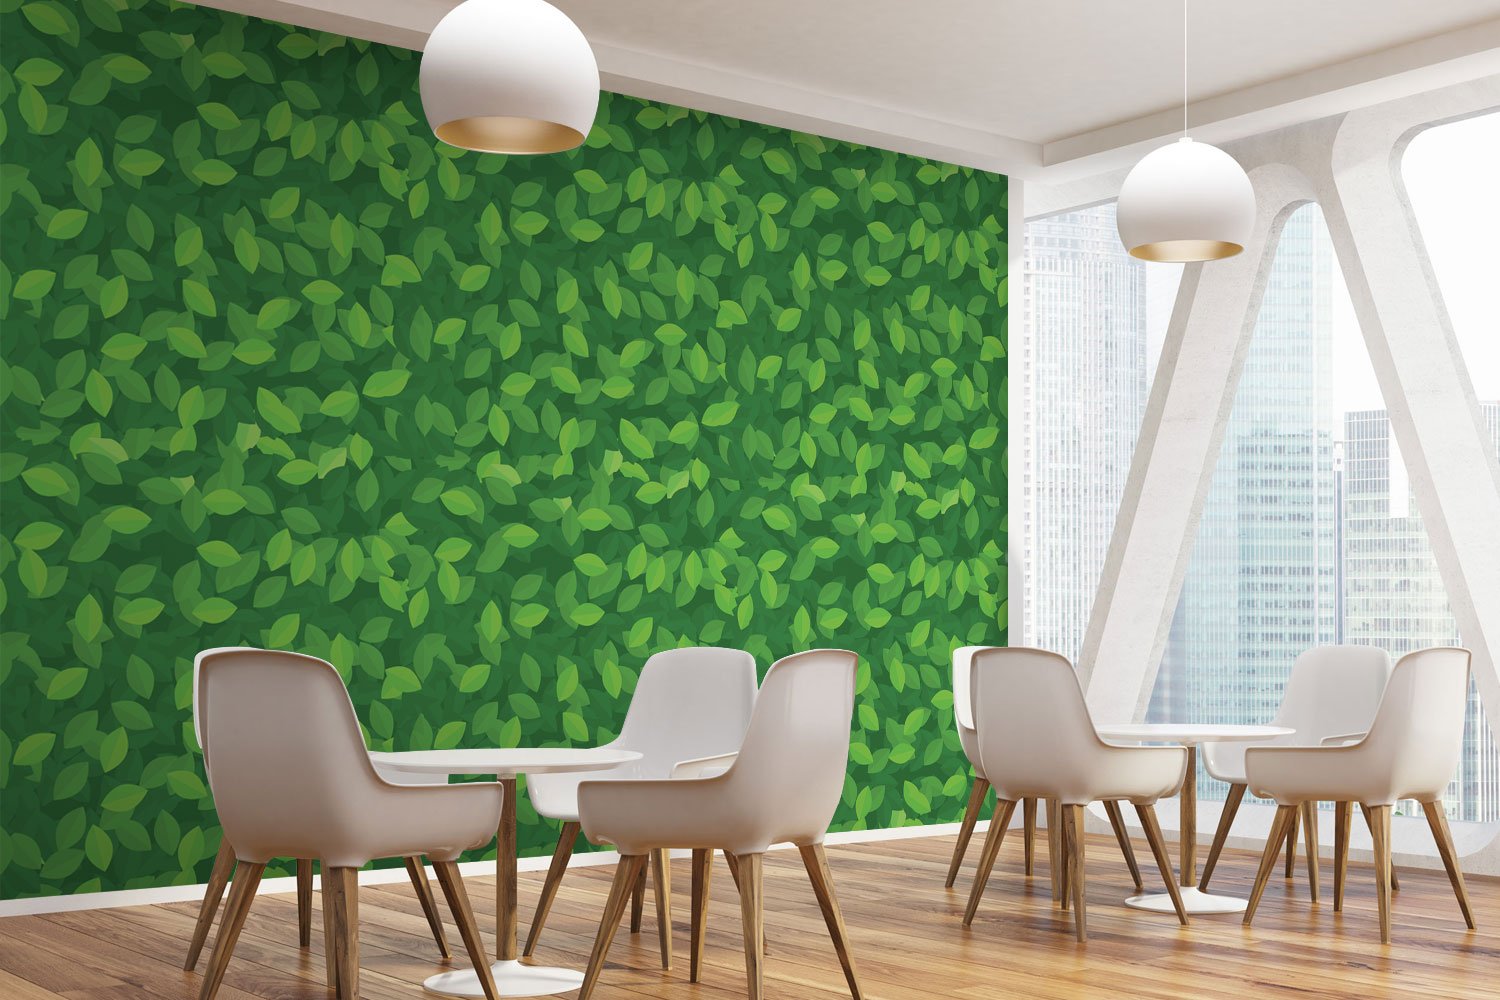 Microfiber Low Cost Classic Decorative Wallpaper at Best Price in Guwahati   Clasico Wallcoverings